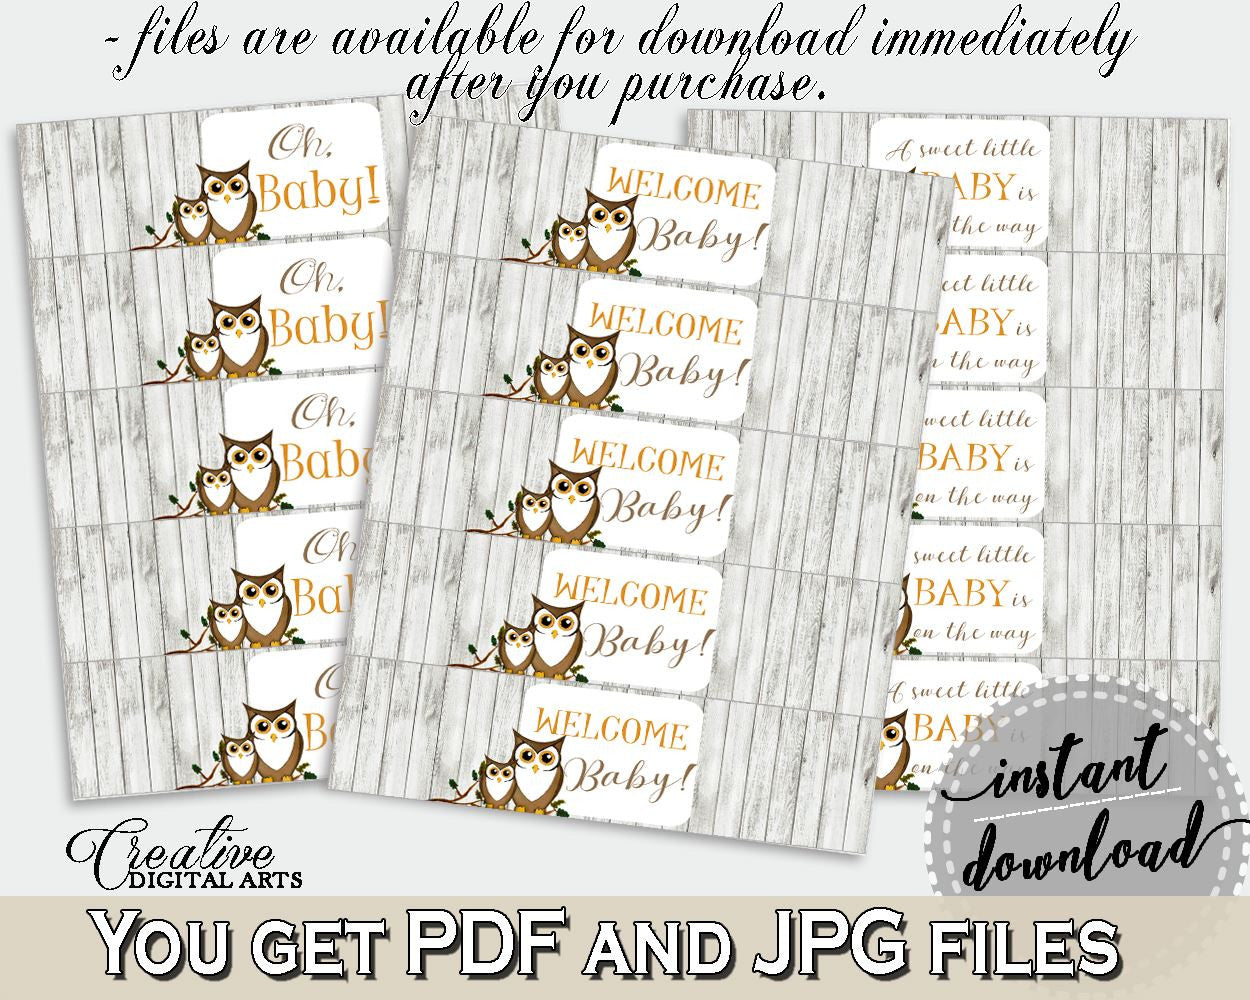 Bottle Labels Baby Shower Bottle Labels Owl Baby Shower Bottle Labels Baby Shower Owl Bottle Labels Gray Brown party organising - 9PUAC - Digital Product